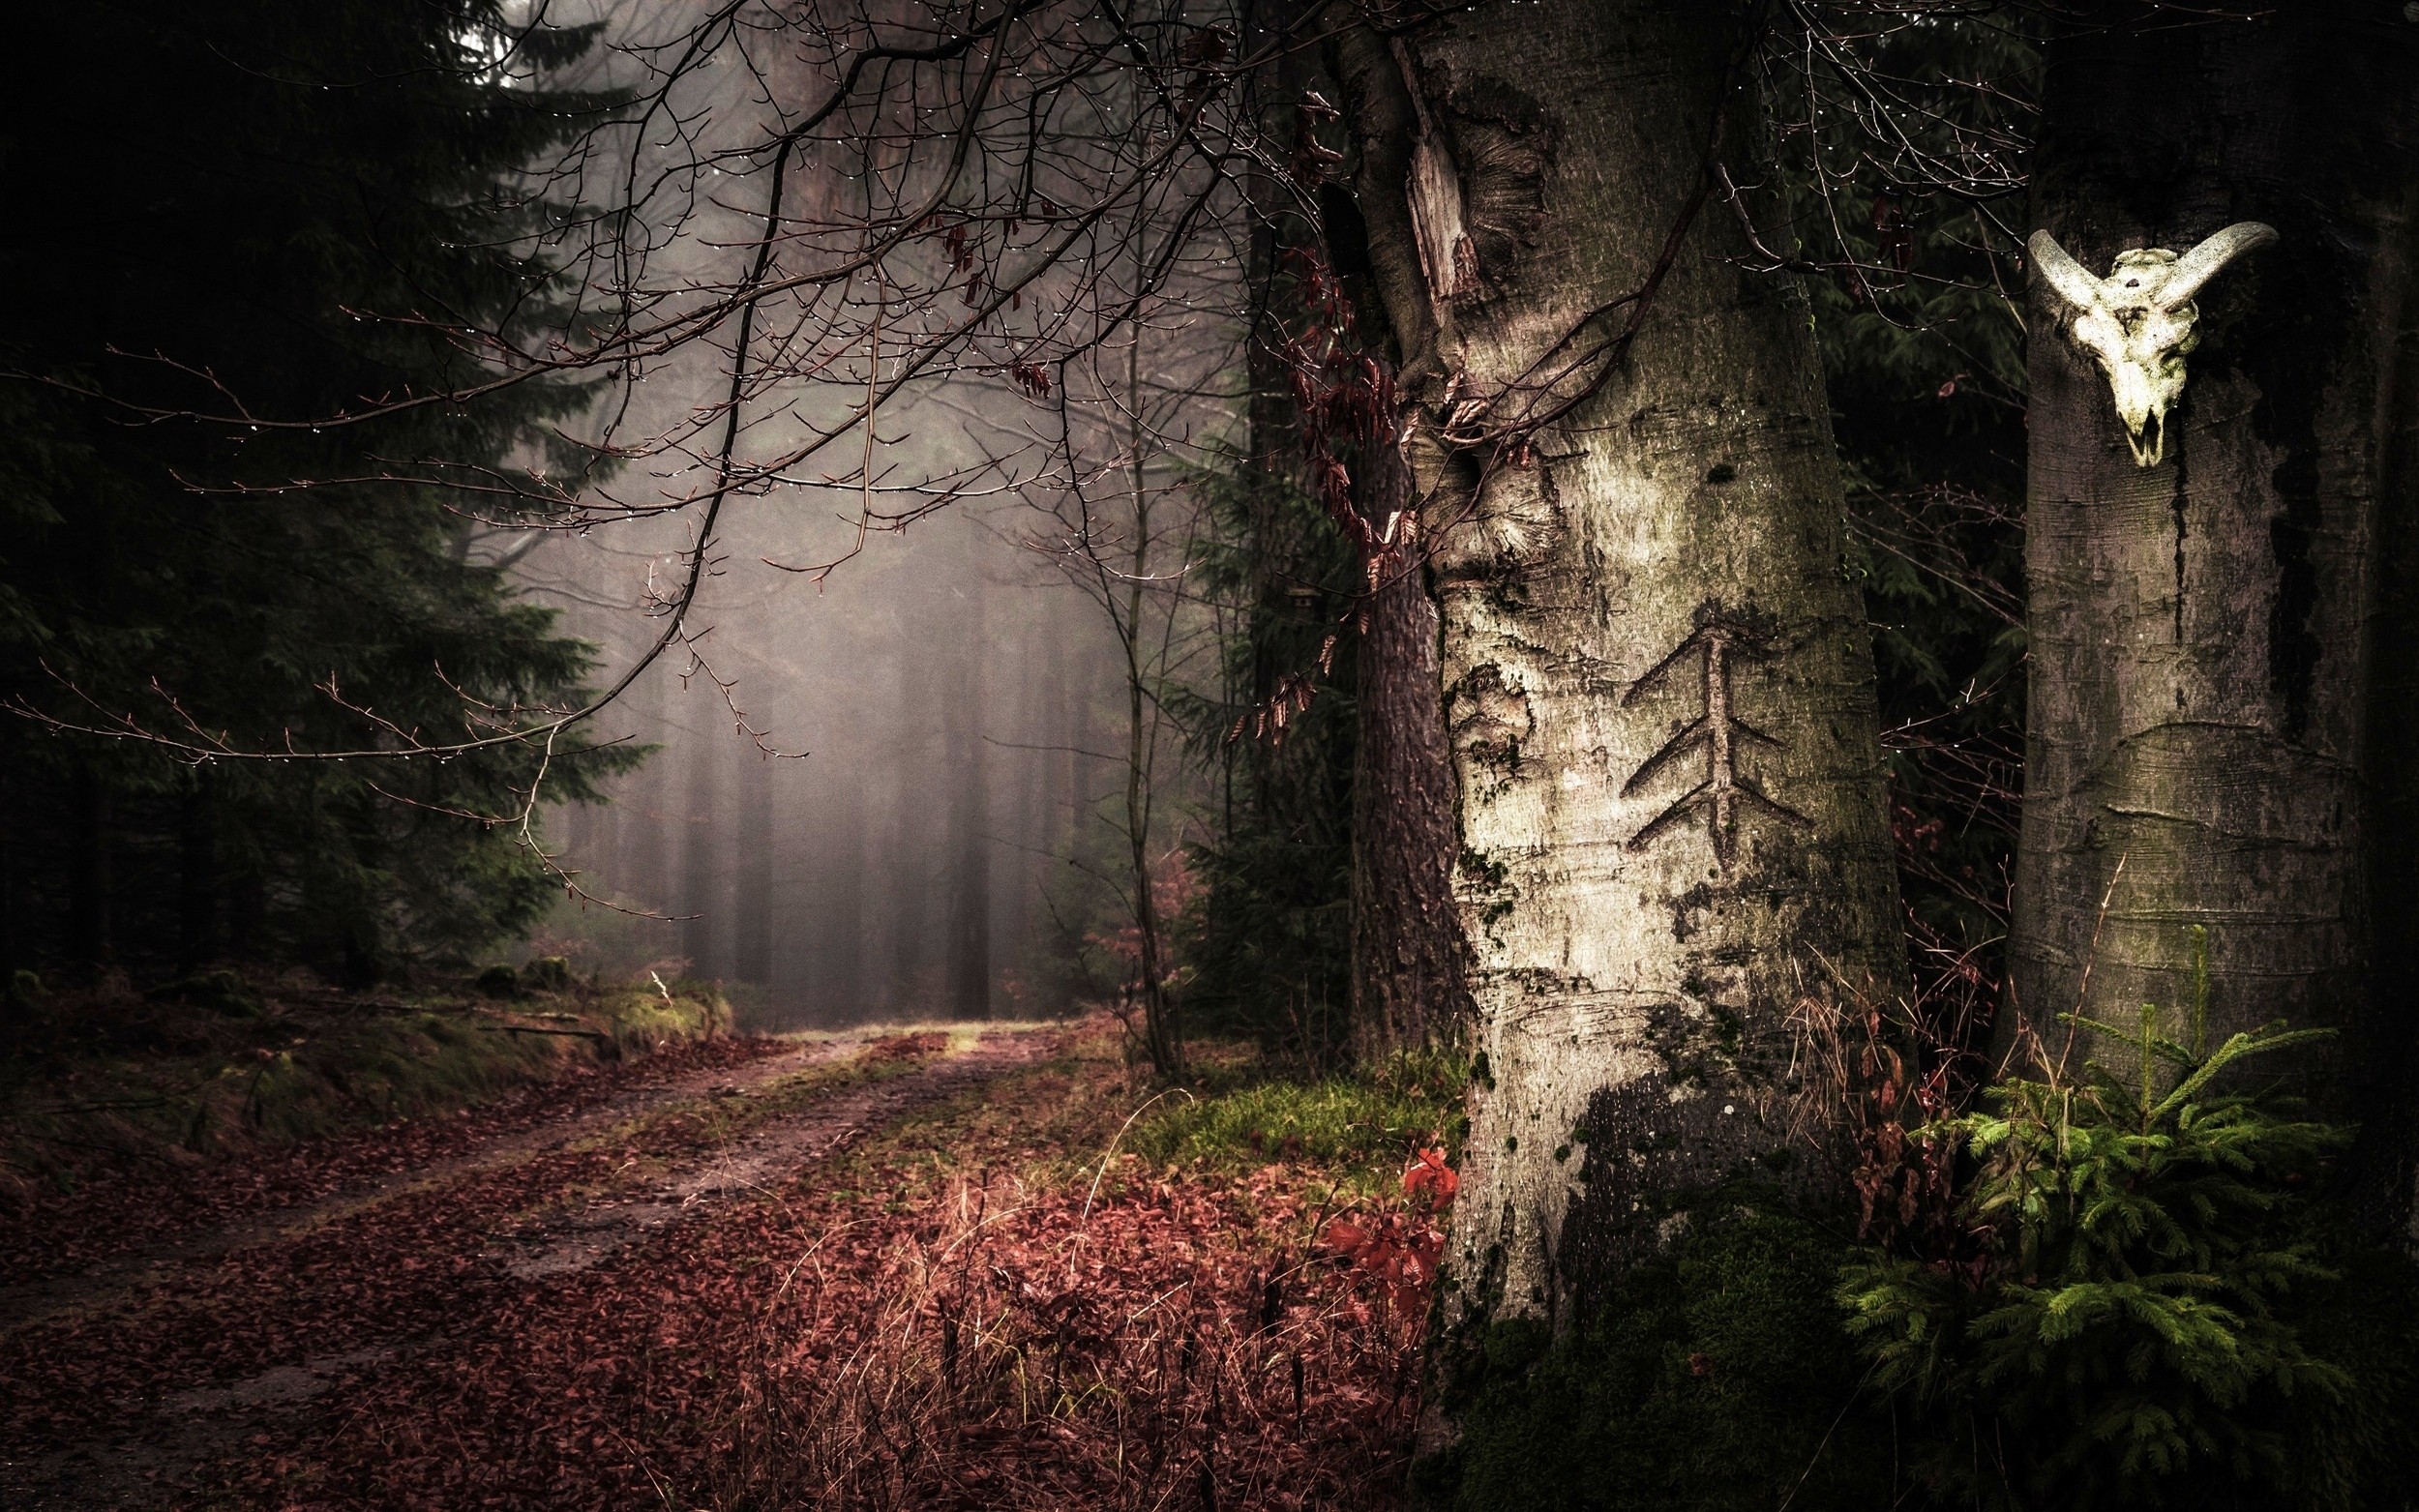 General 2500x1563 nature forest path leaves mist water drops trees shrubs signs low light